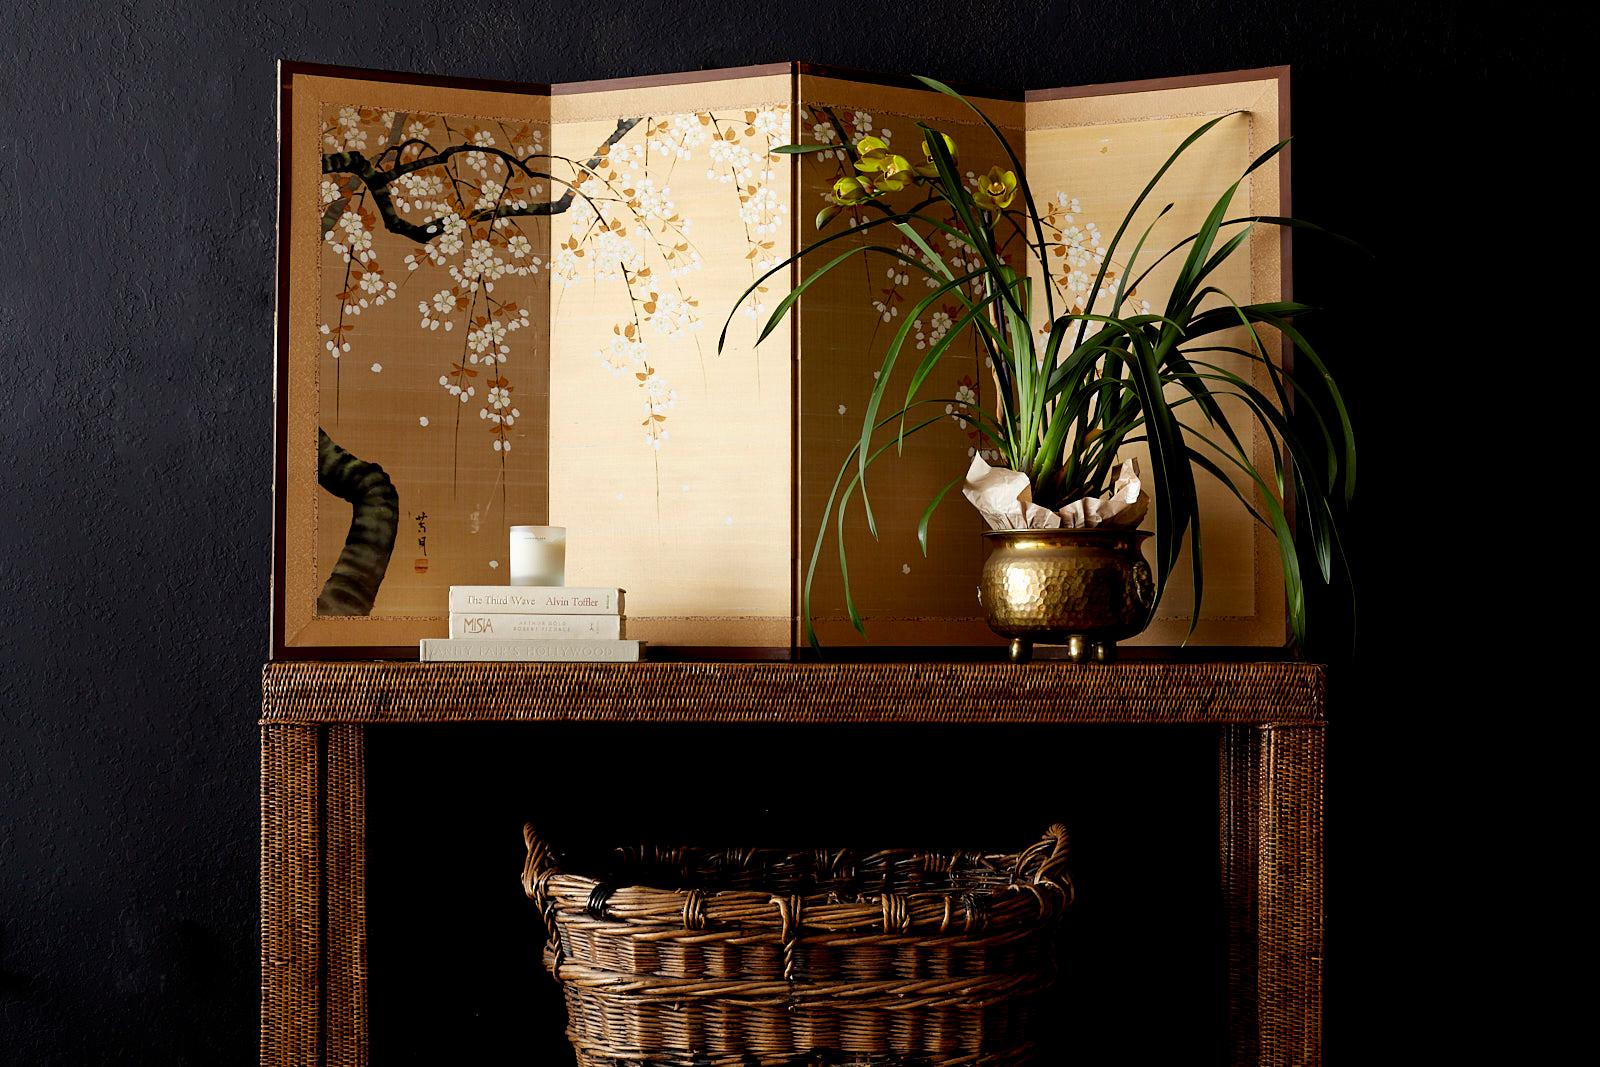 Wonderful Japanese four-panel byobu screen depicting a large prunus or Sakura cherry blossom branch in bloom. Hand painted on a gilt silk ground with a fine textured finish. Set in a wooden frame with a golden silk brocade border. From an estate in